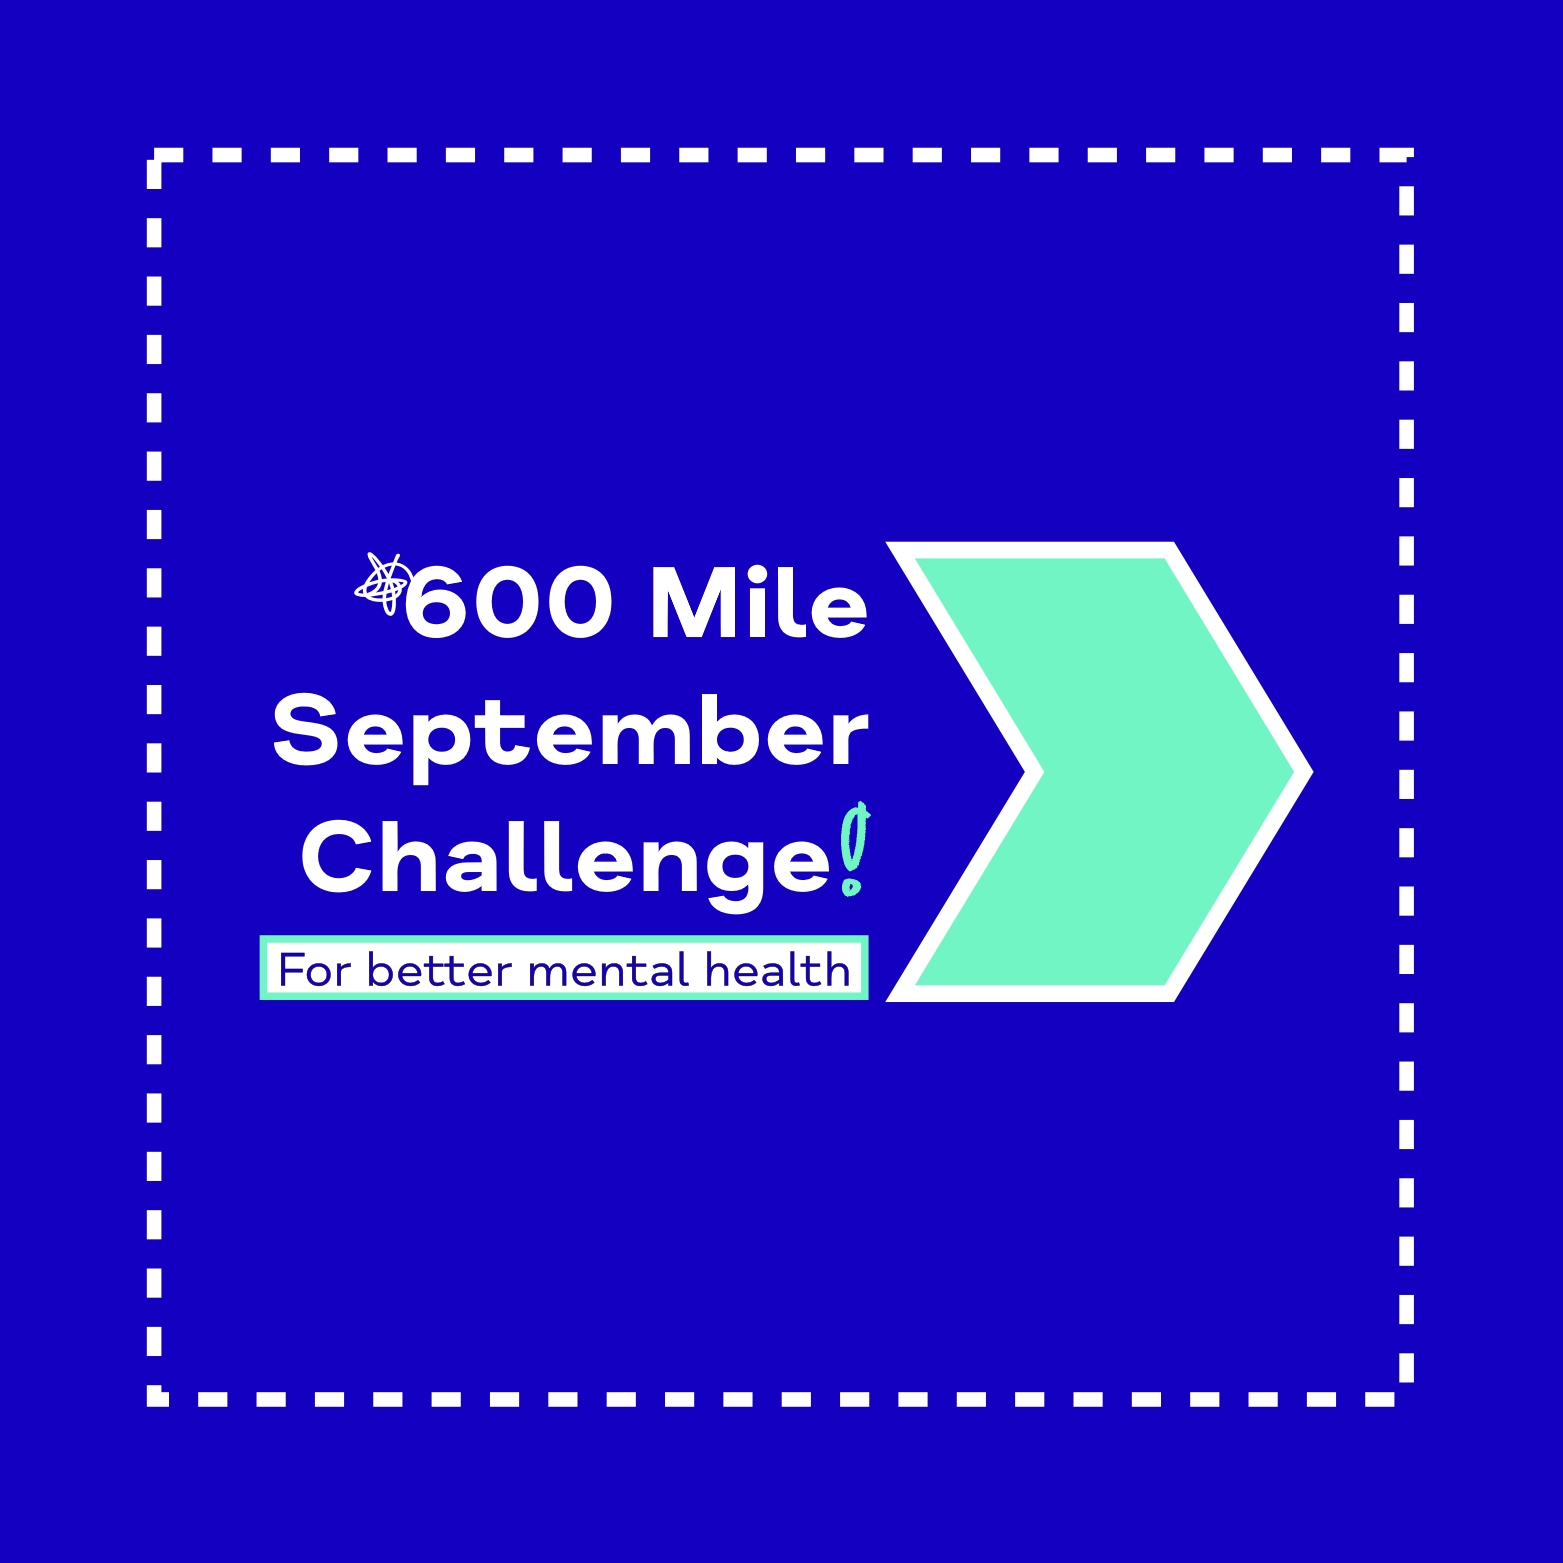 We have re-launched our 600 Mile September fundraising challenge!